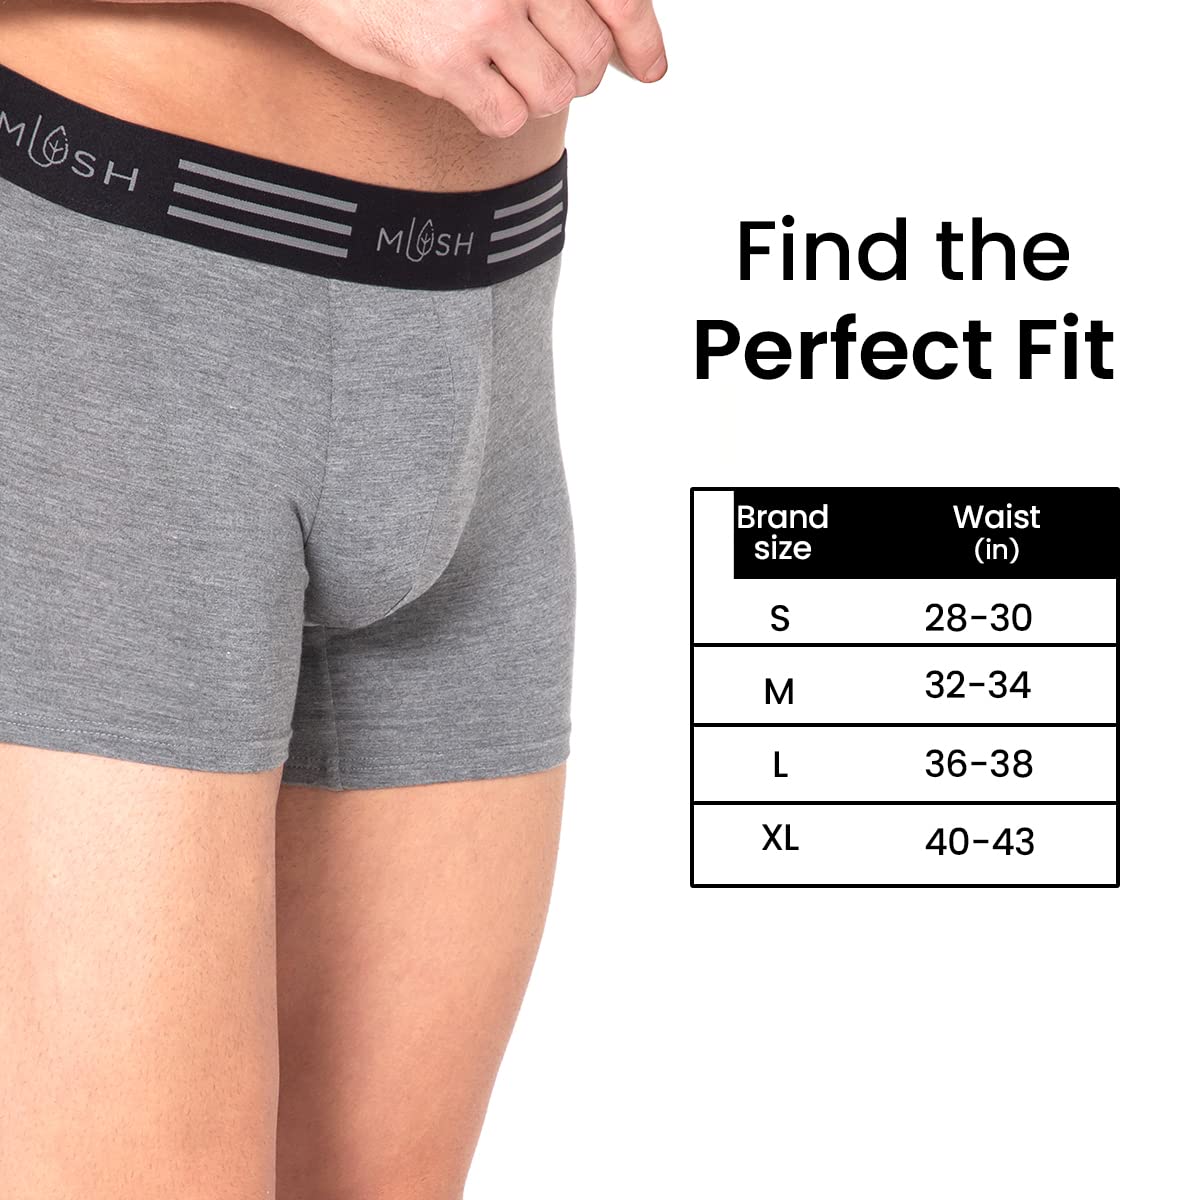 Mush Ultra Soft, Breathable, Feather Light Men's Bamboo Trunk || Naturally Anti-Odor and Anti-Microbial Bamboo Innerwear Pack of 3 (XL, Grey White and Black)